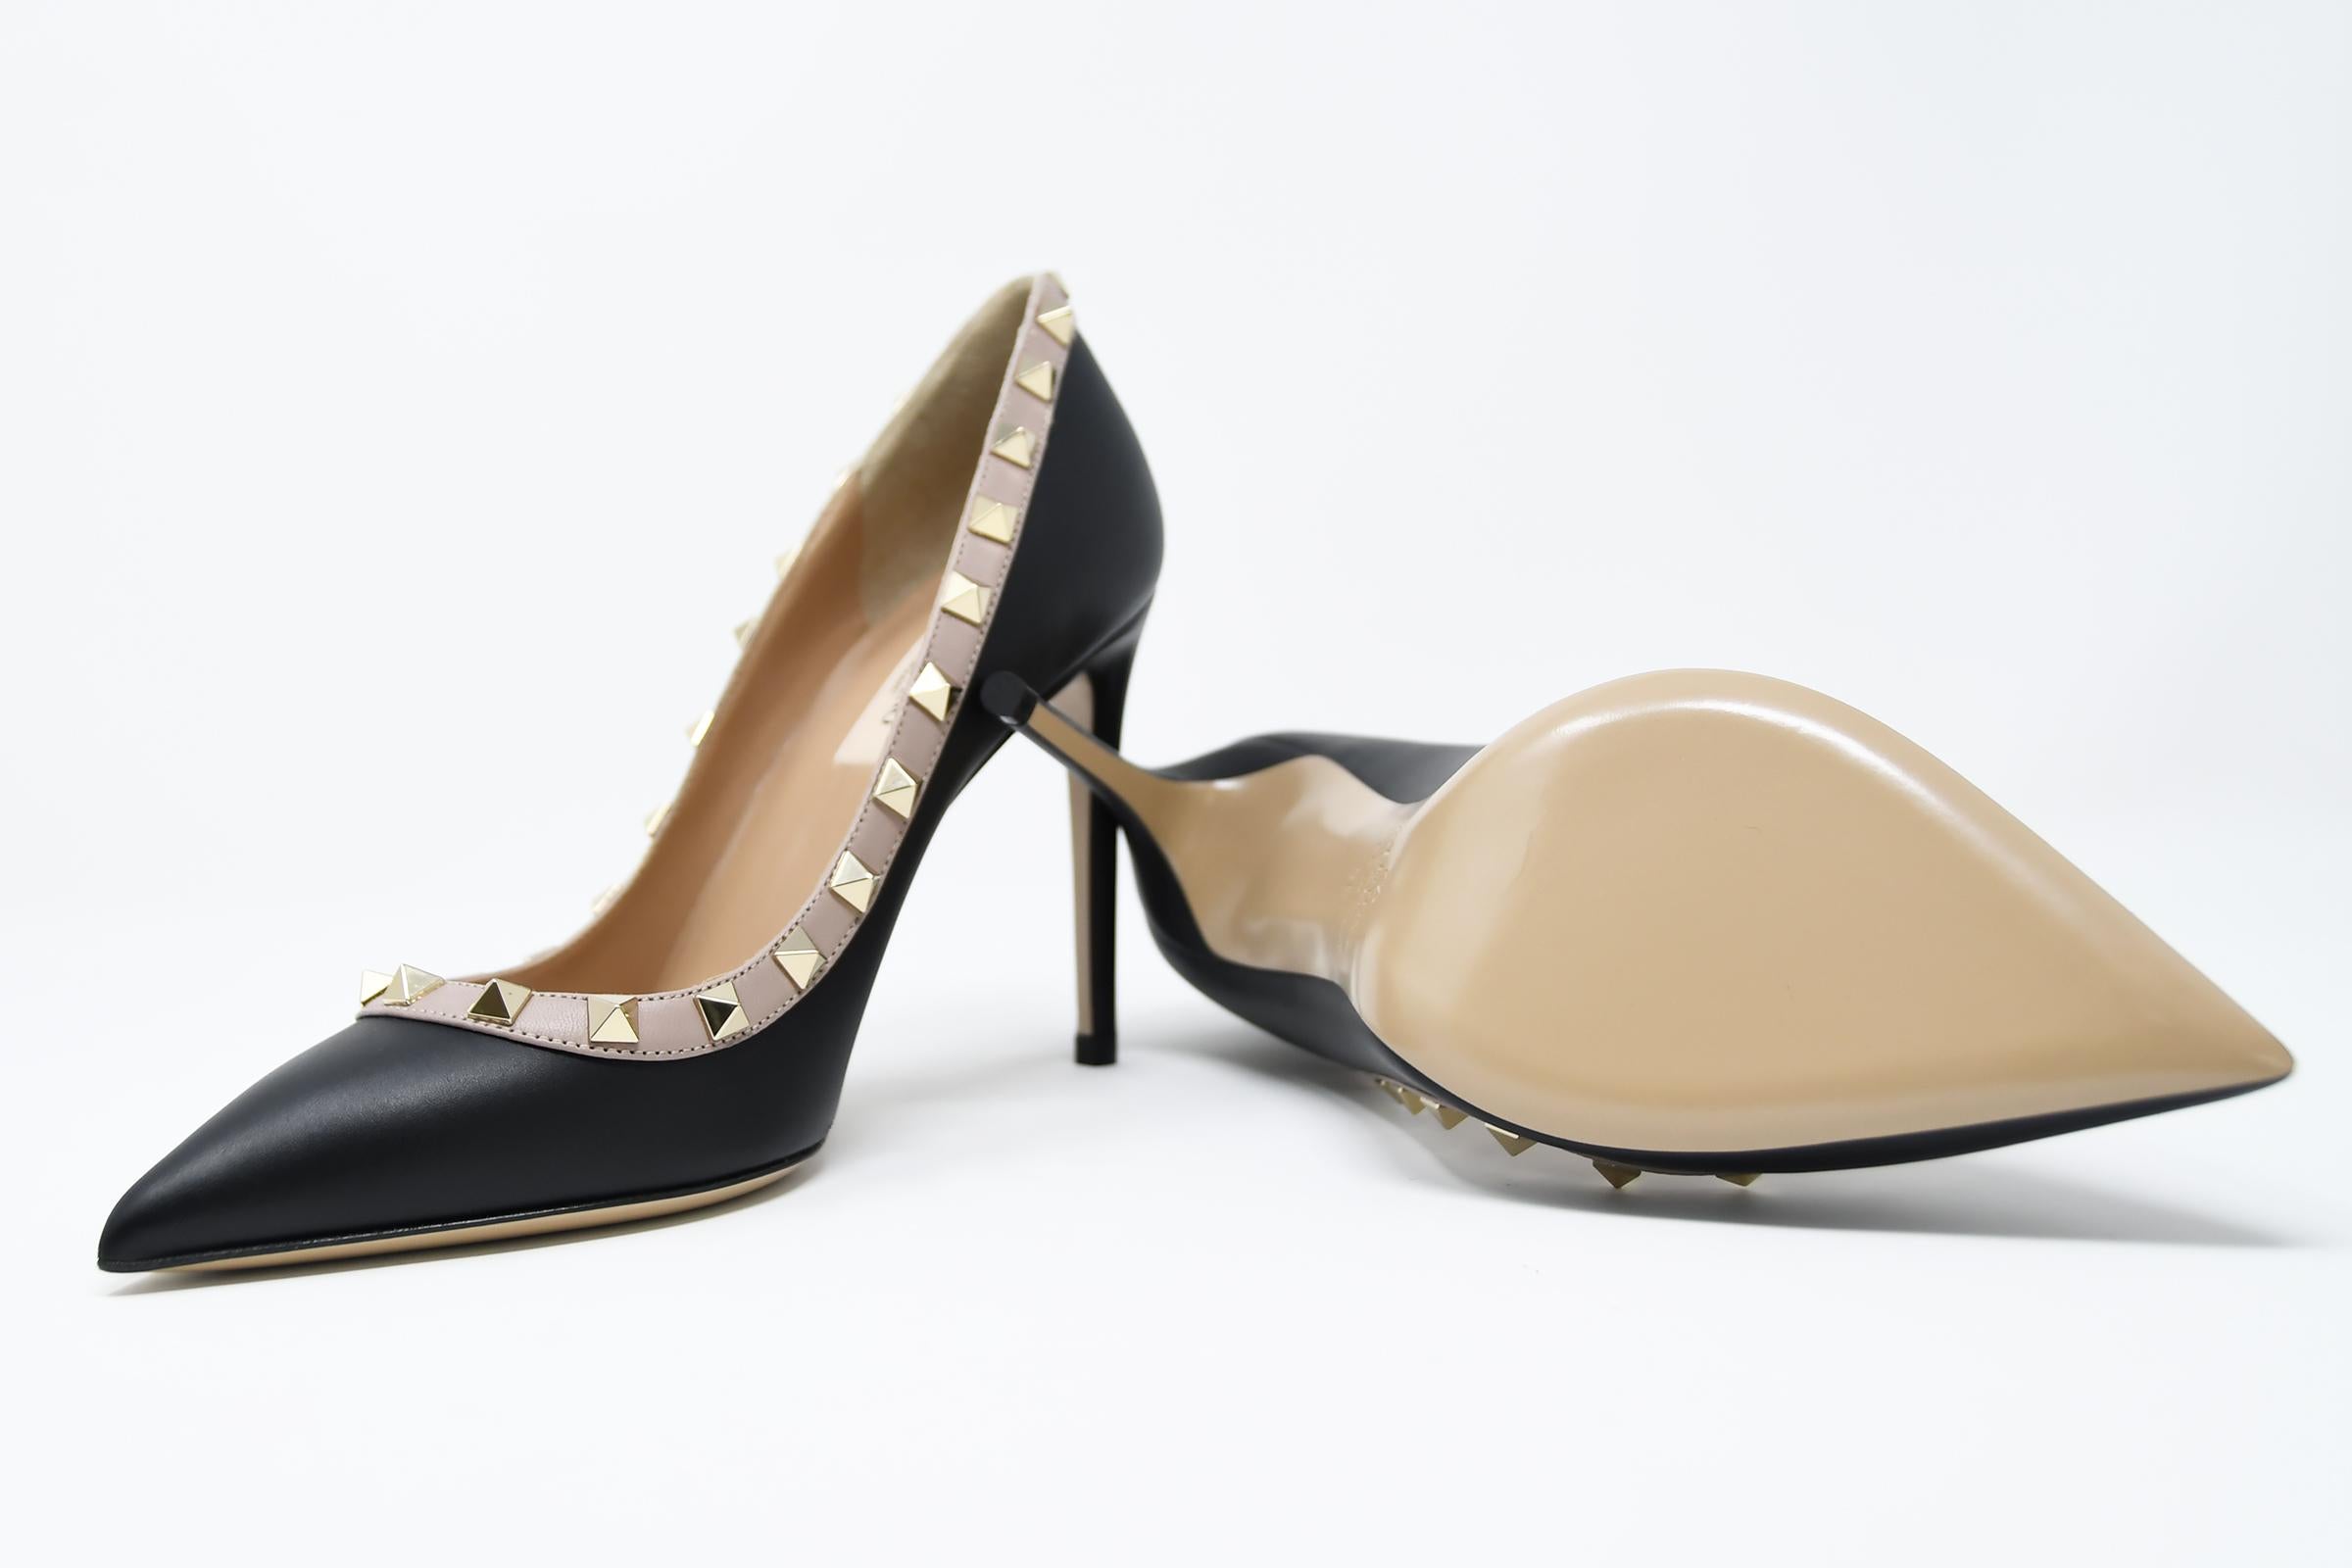 Classic Valentino stiletto in a smooth black calf leather with signature gold rock stud design.  Brand new and comes in original box with dust bag.